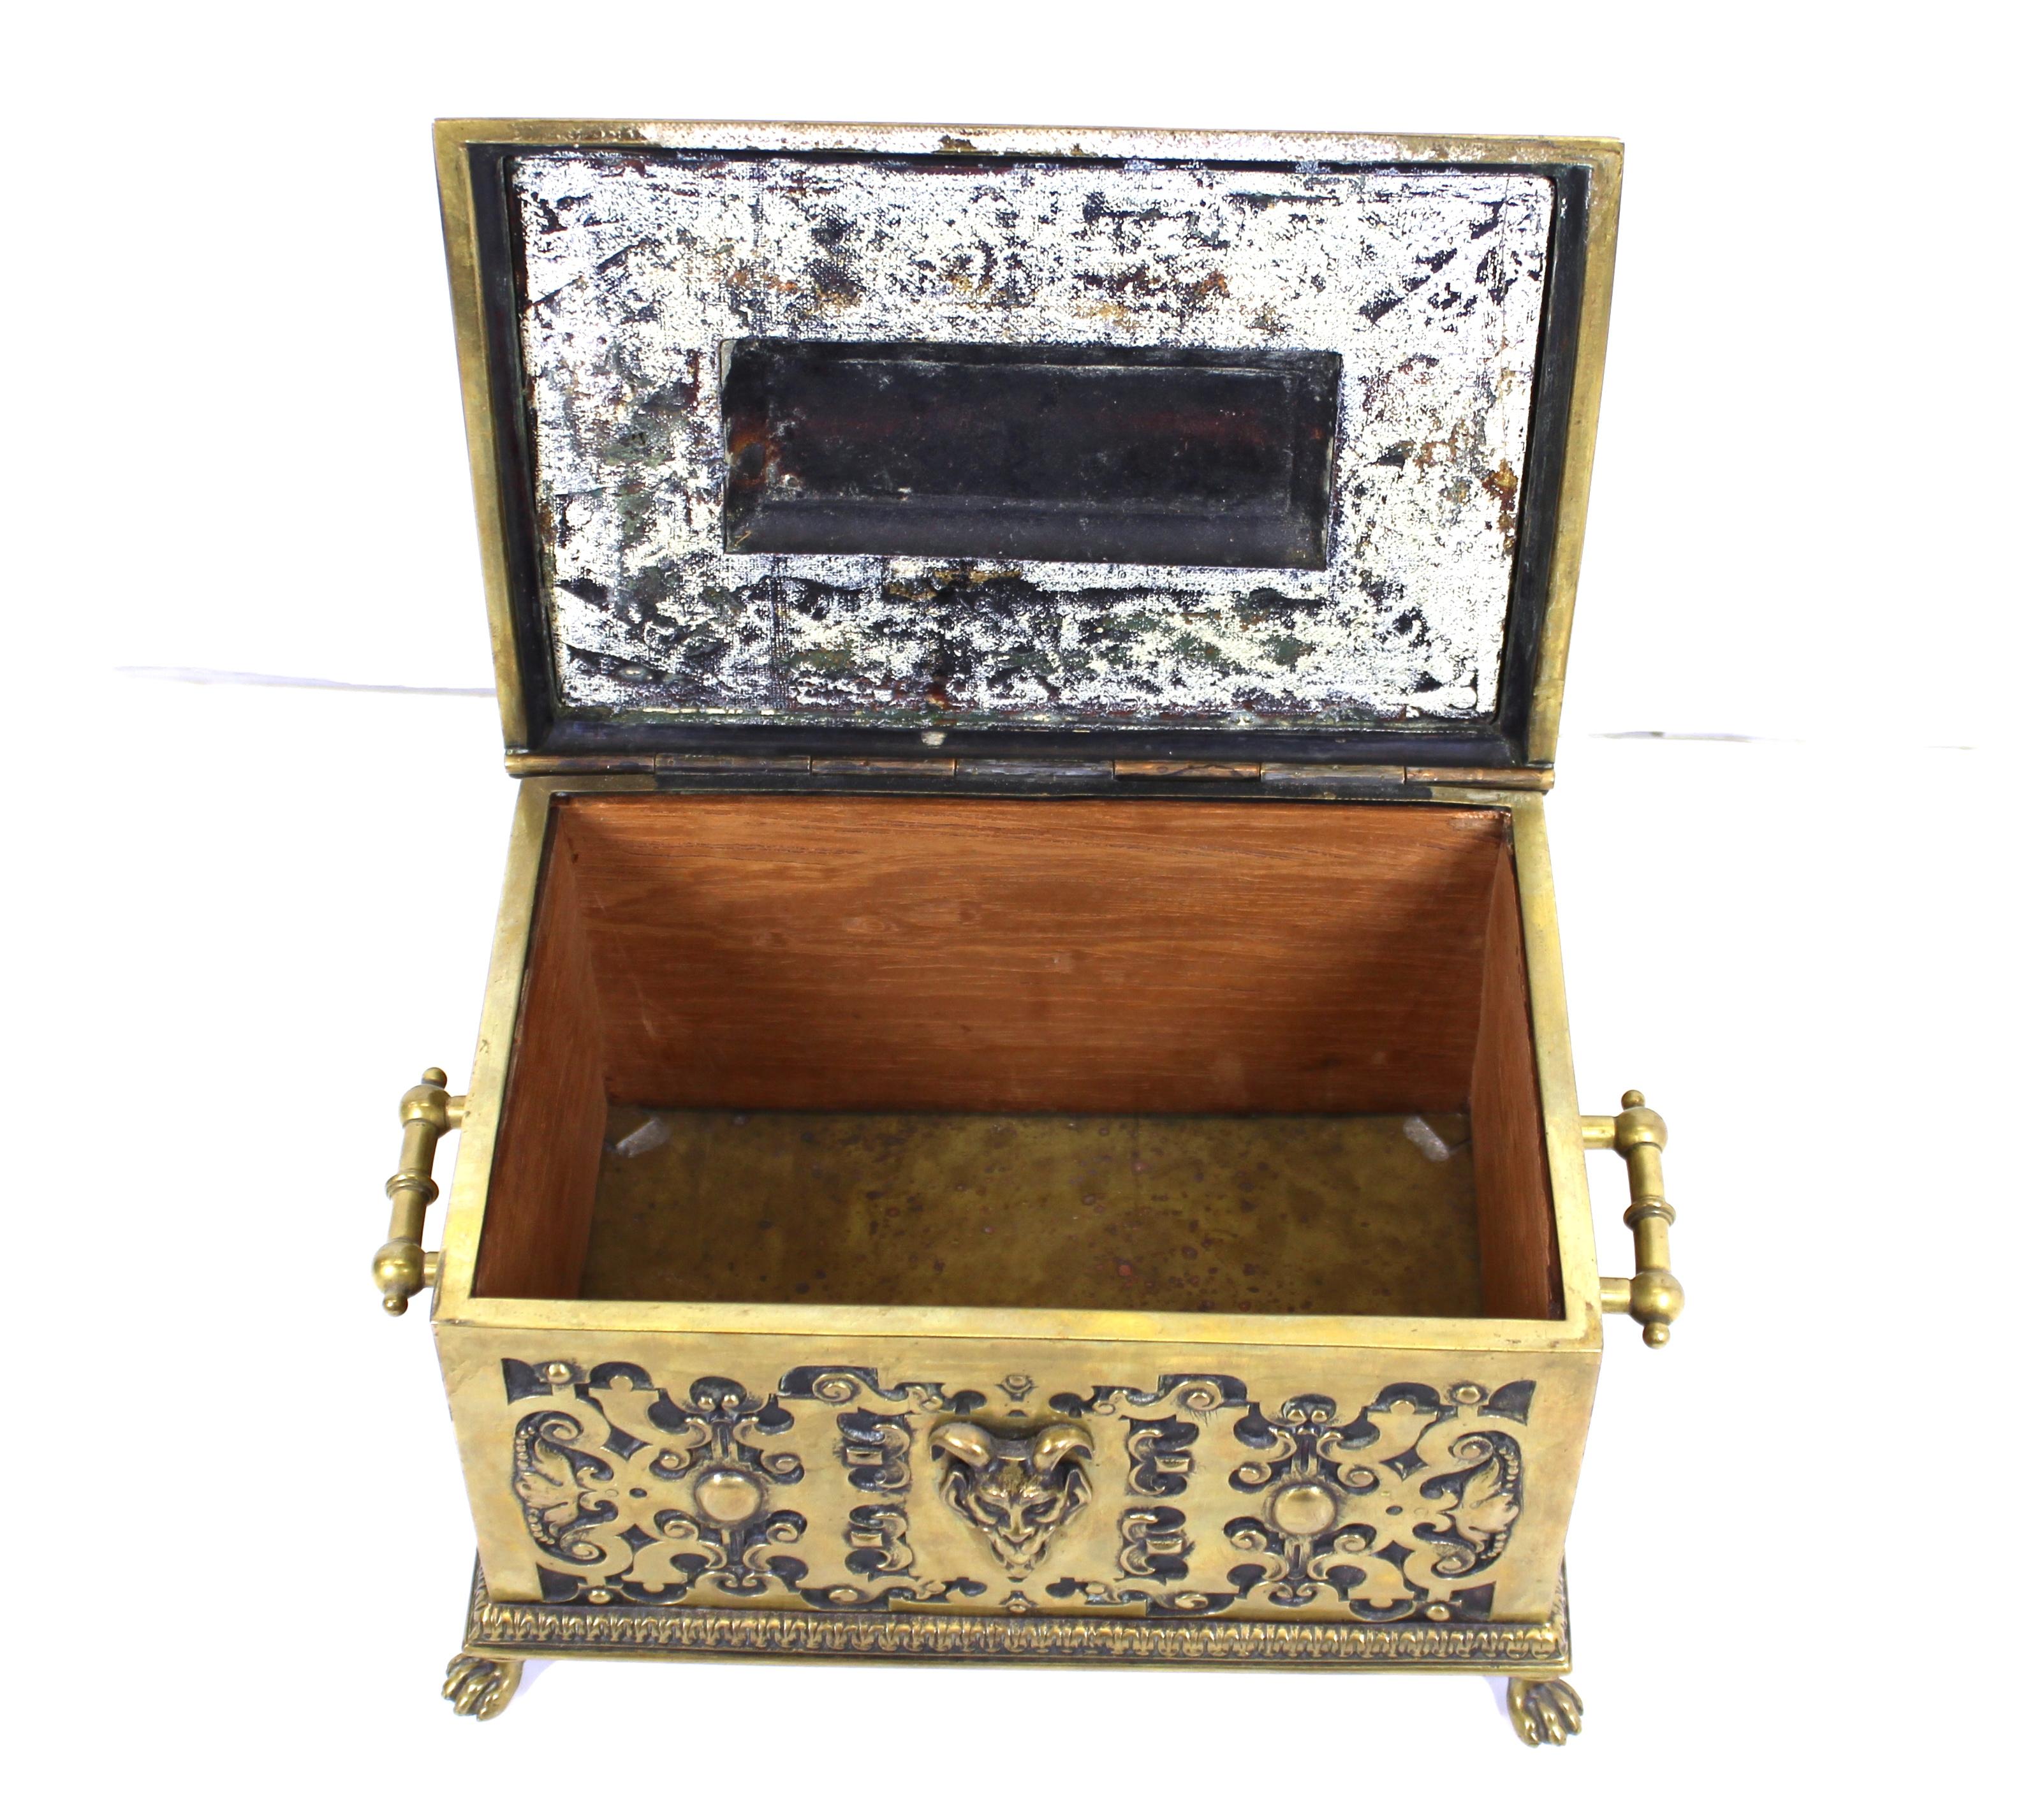 American Aesthetic Movement Ornate Cast Bronze Casket Humidor Box with Grotesque 1